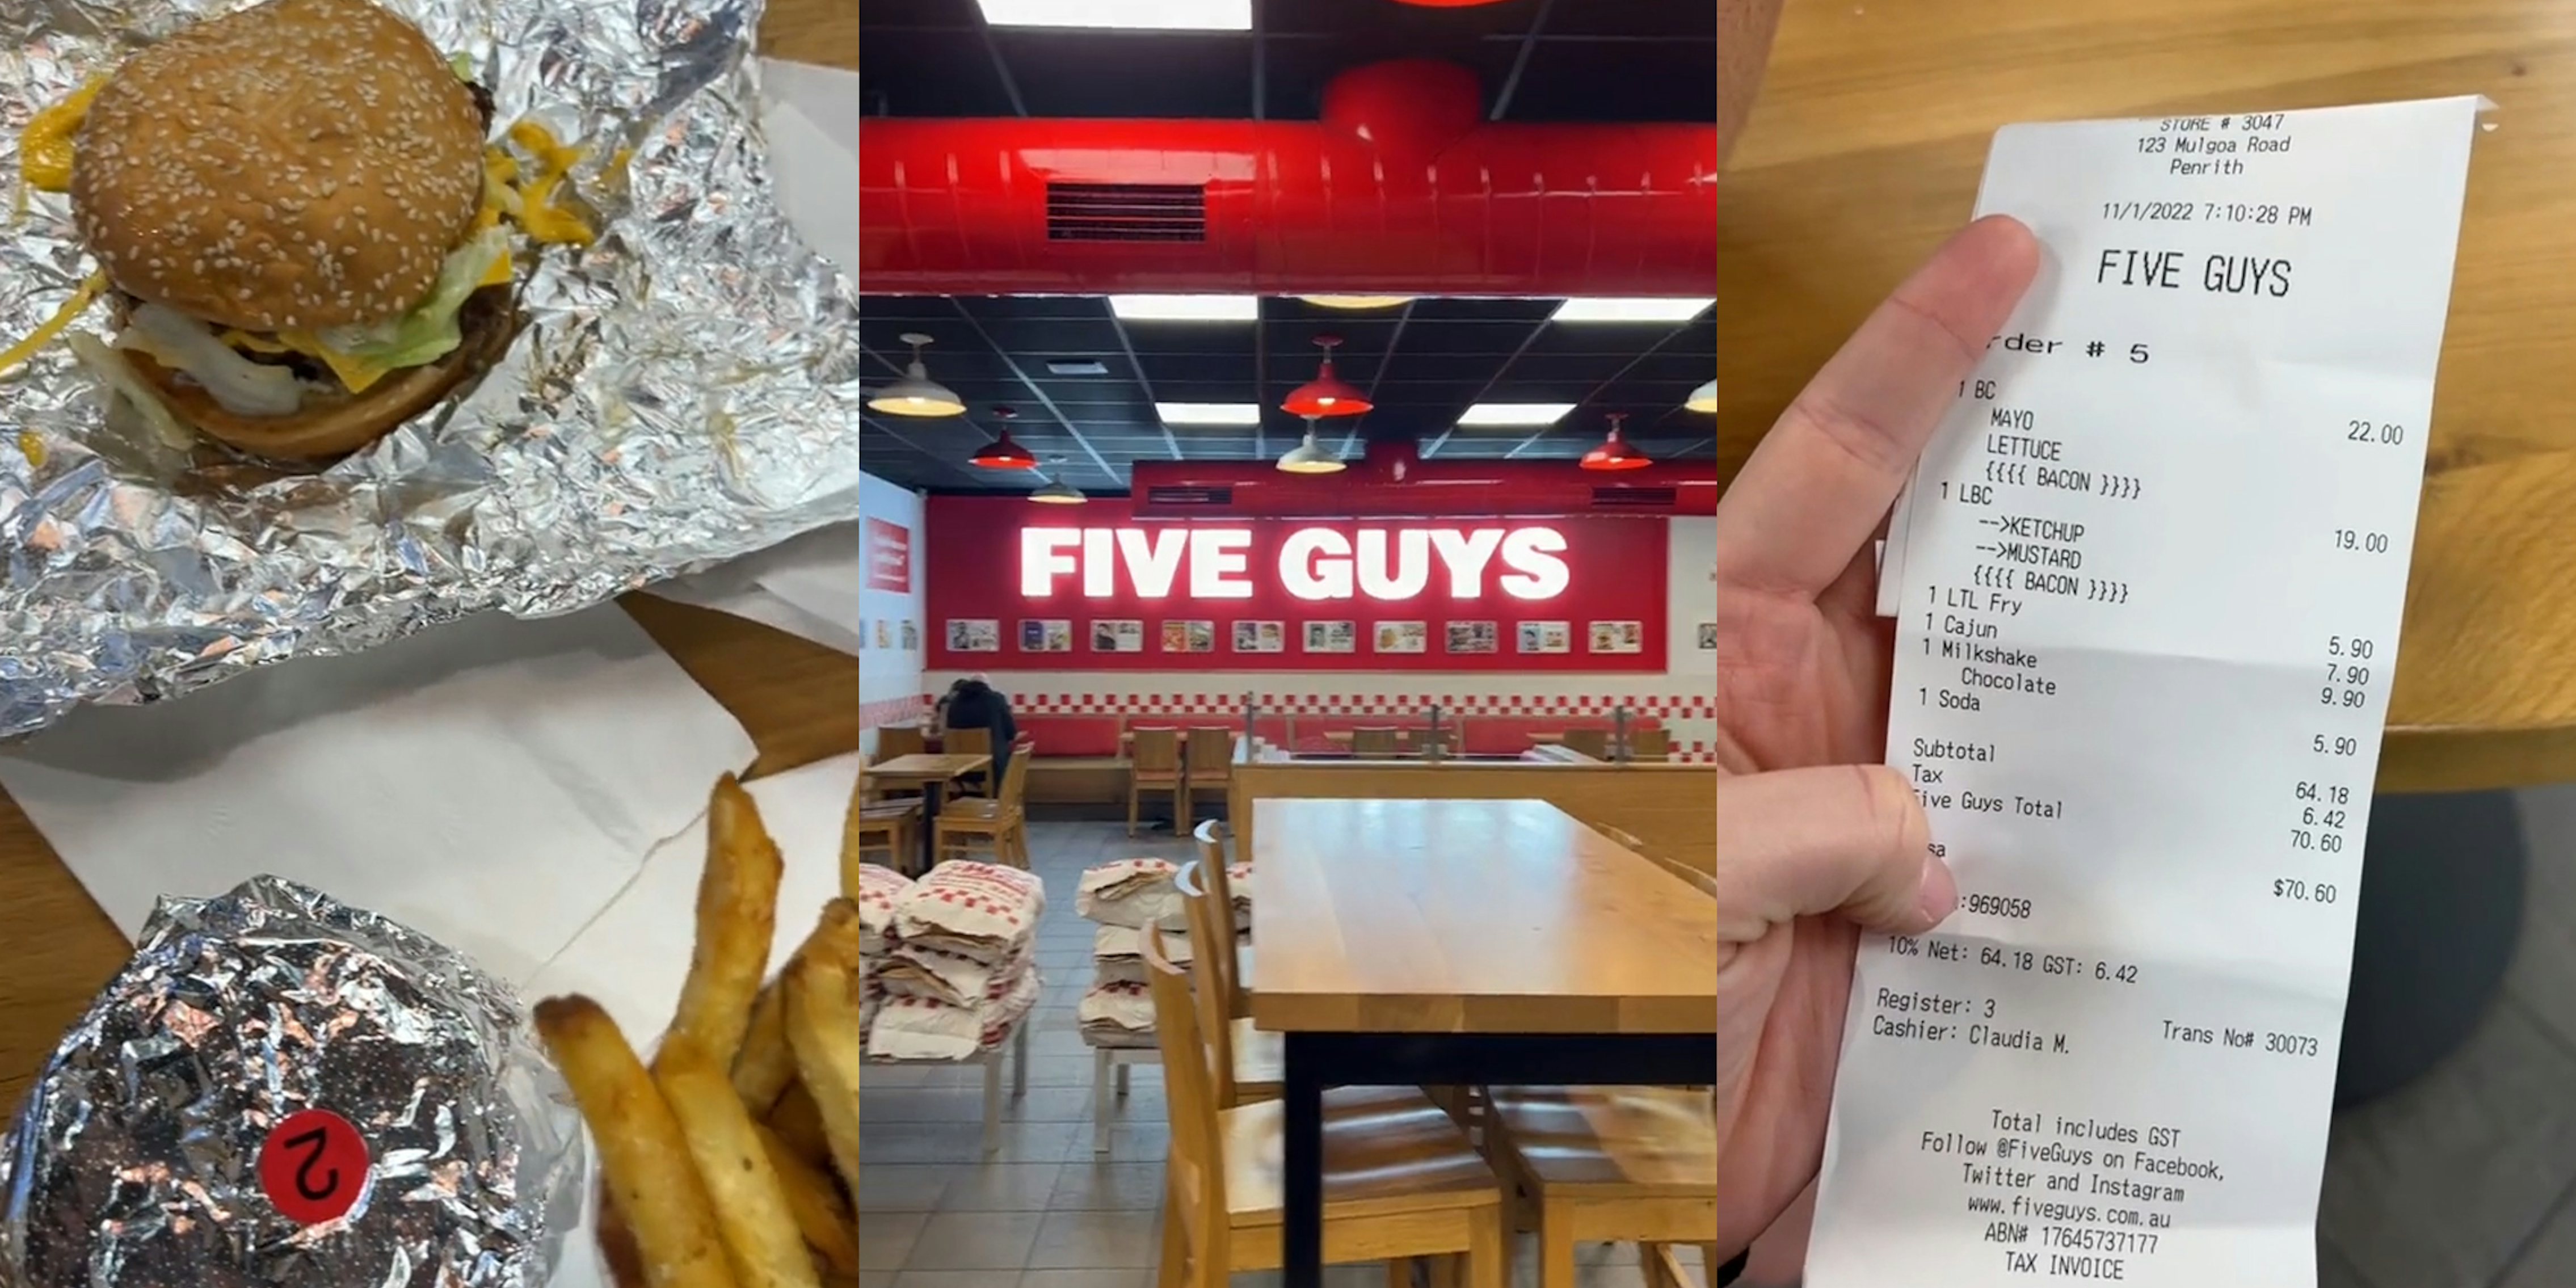 2 meals at Five Guys (l) Five Guys interior with sign (c) man holding Five Guys receipt with total '$70.60' (r)